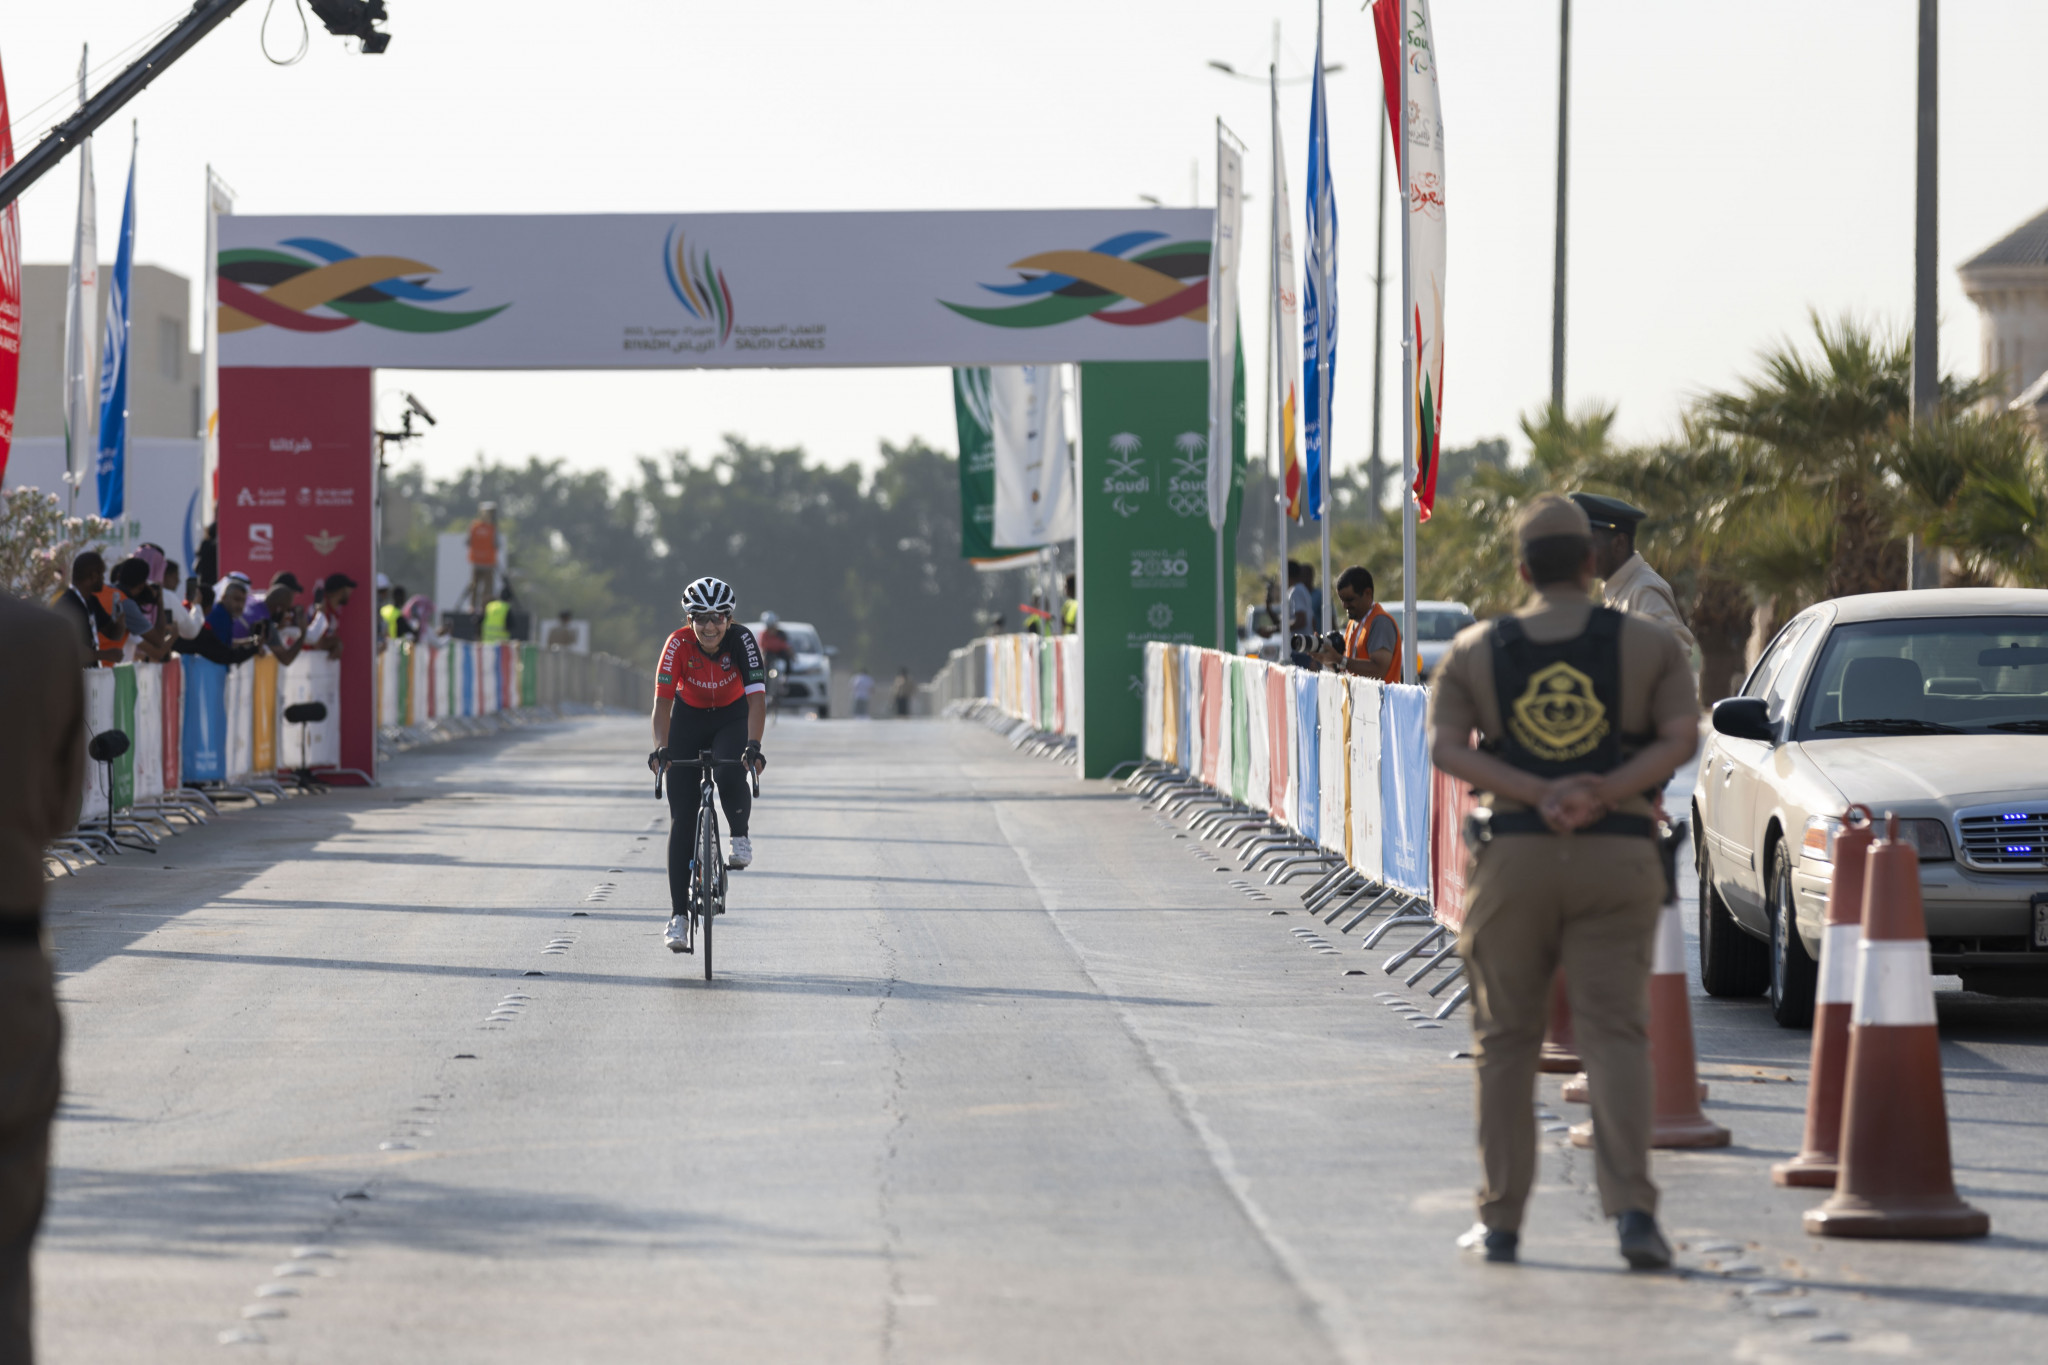 The road race finished was based outside the Prince Faisal bin Fahad Olympic Complex ©Saudi Games